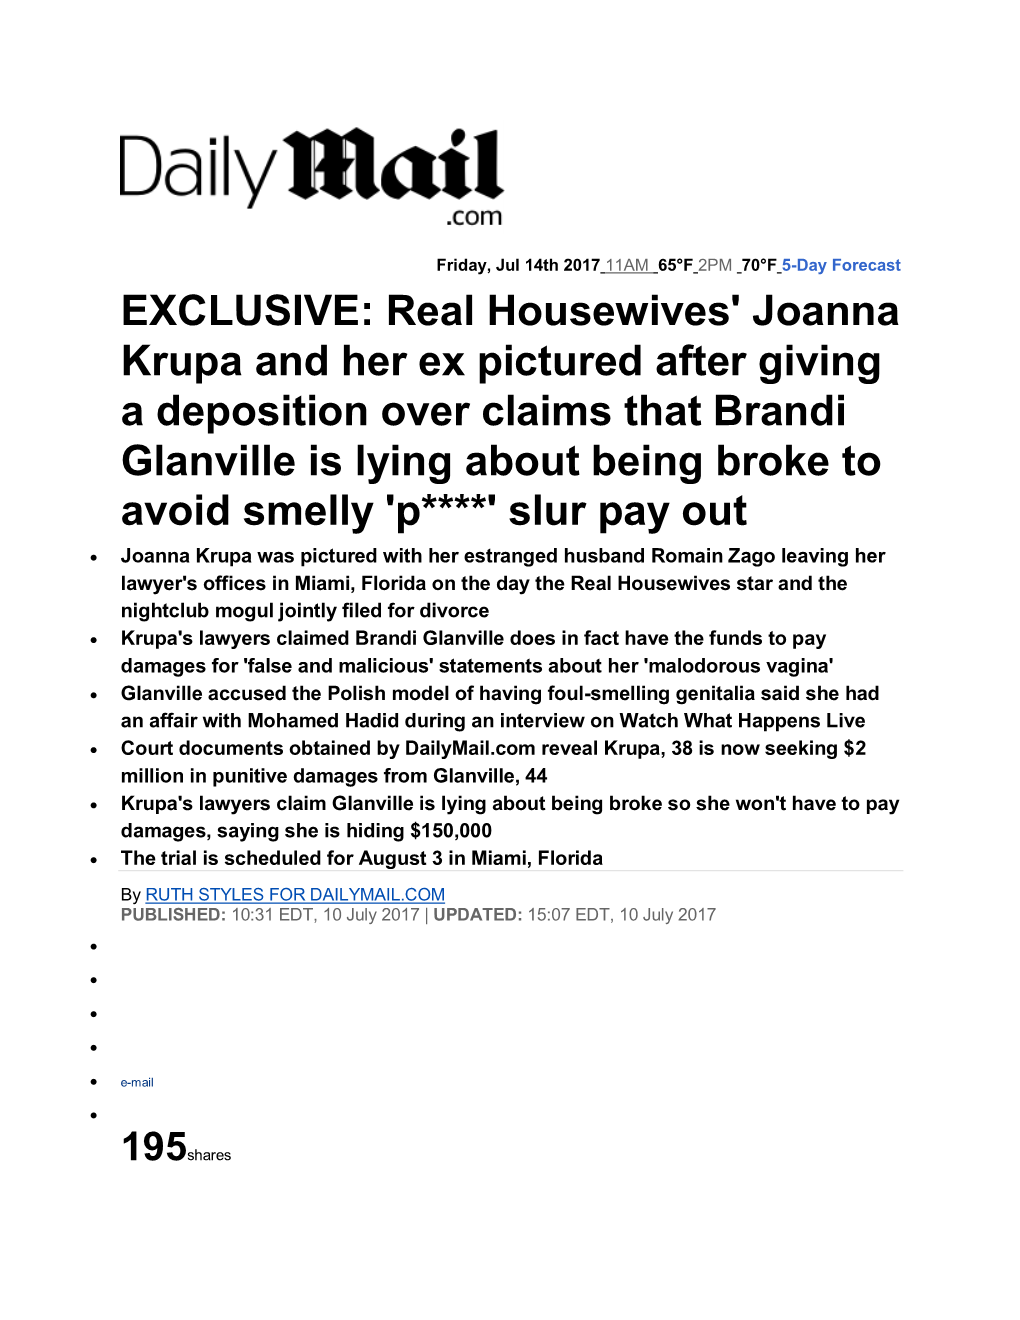 EXCLUSIVE: Real Housewives' Joanna Krupa and Her Ex Pictured After Giving a Deposition Over Claims That Brandi Glanville Is Lyin